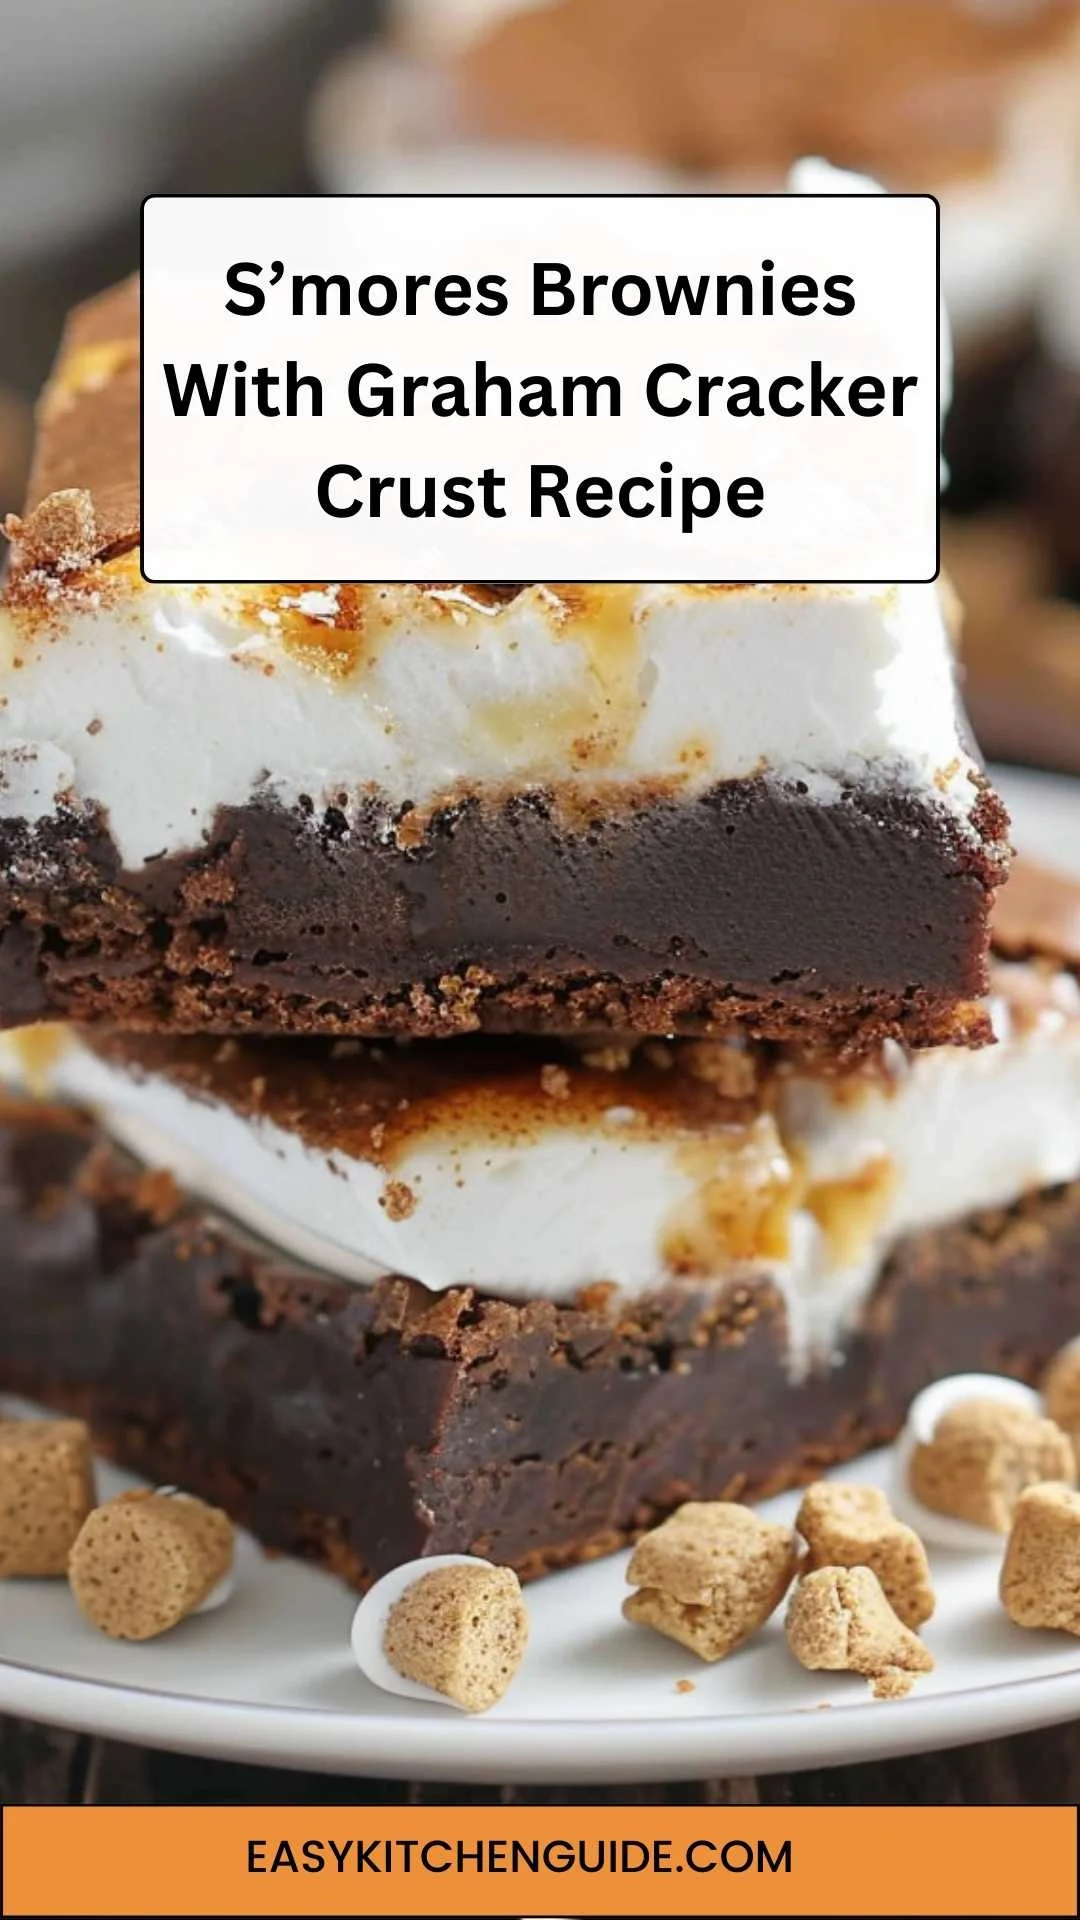 S’mores Brownies With Graham Cracker Crust Recipe